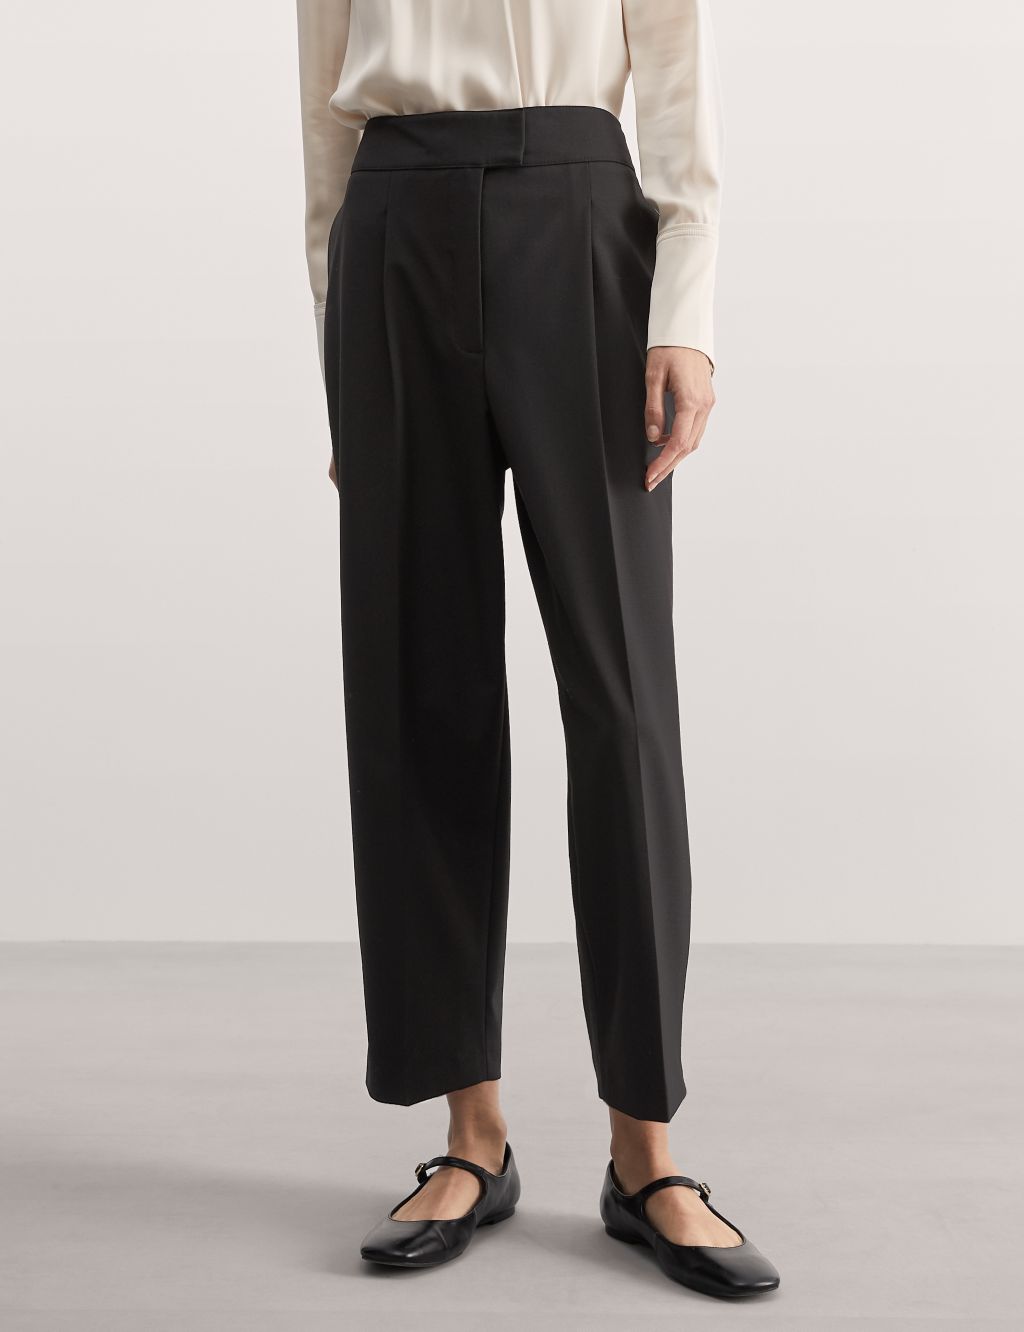 Wool Blend Tapered Ankle Grazer Trousers image 5